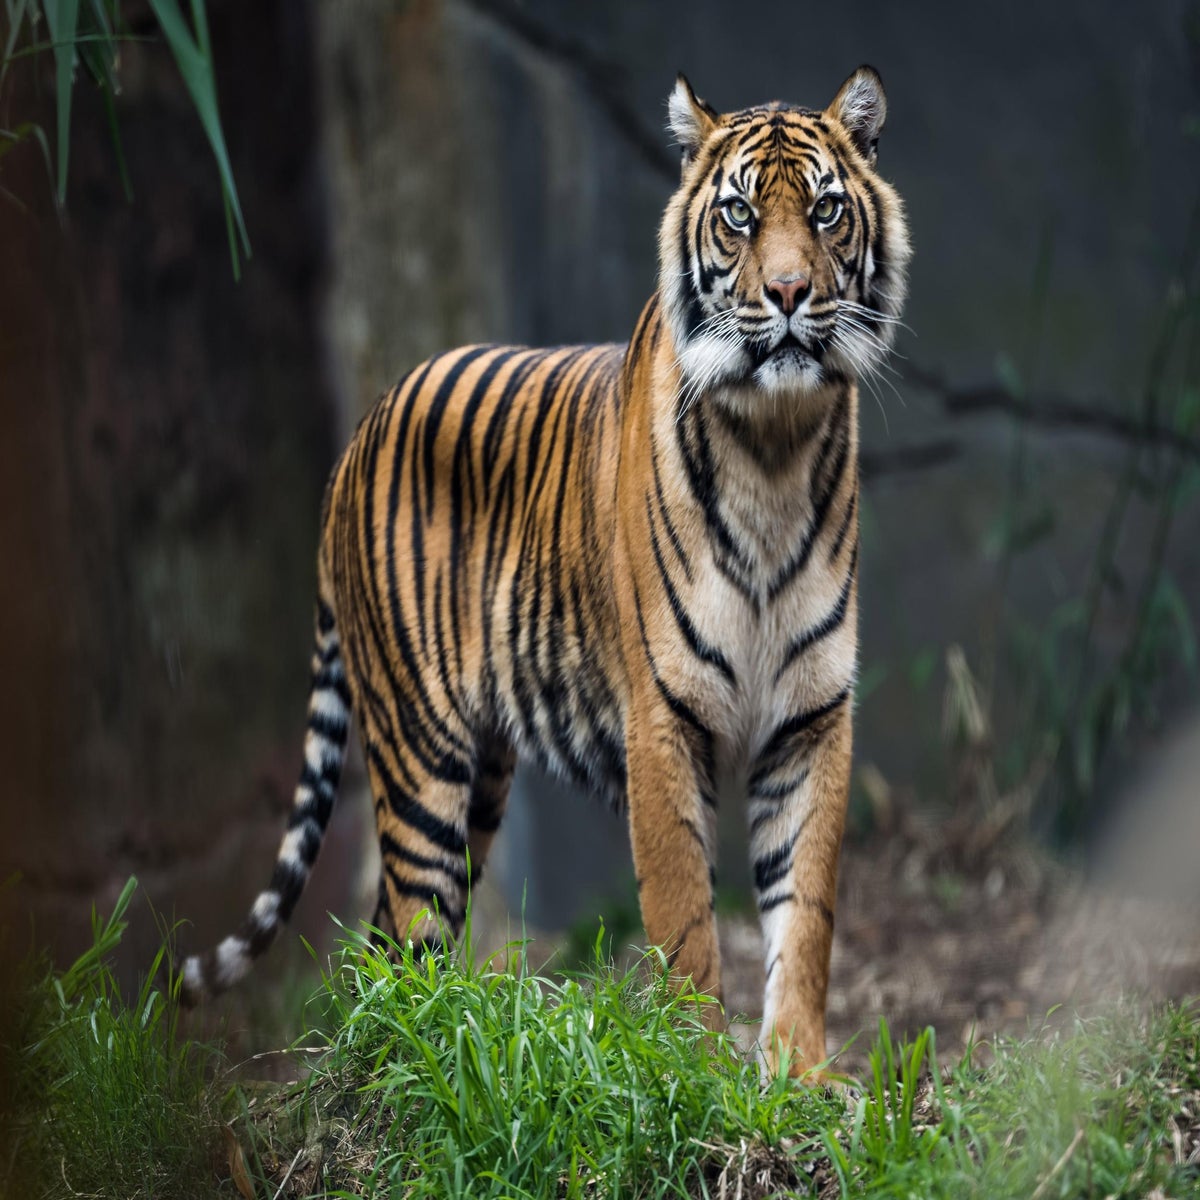 Bengal Tiger Line's new owners focus on growth